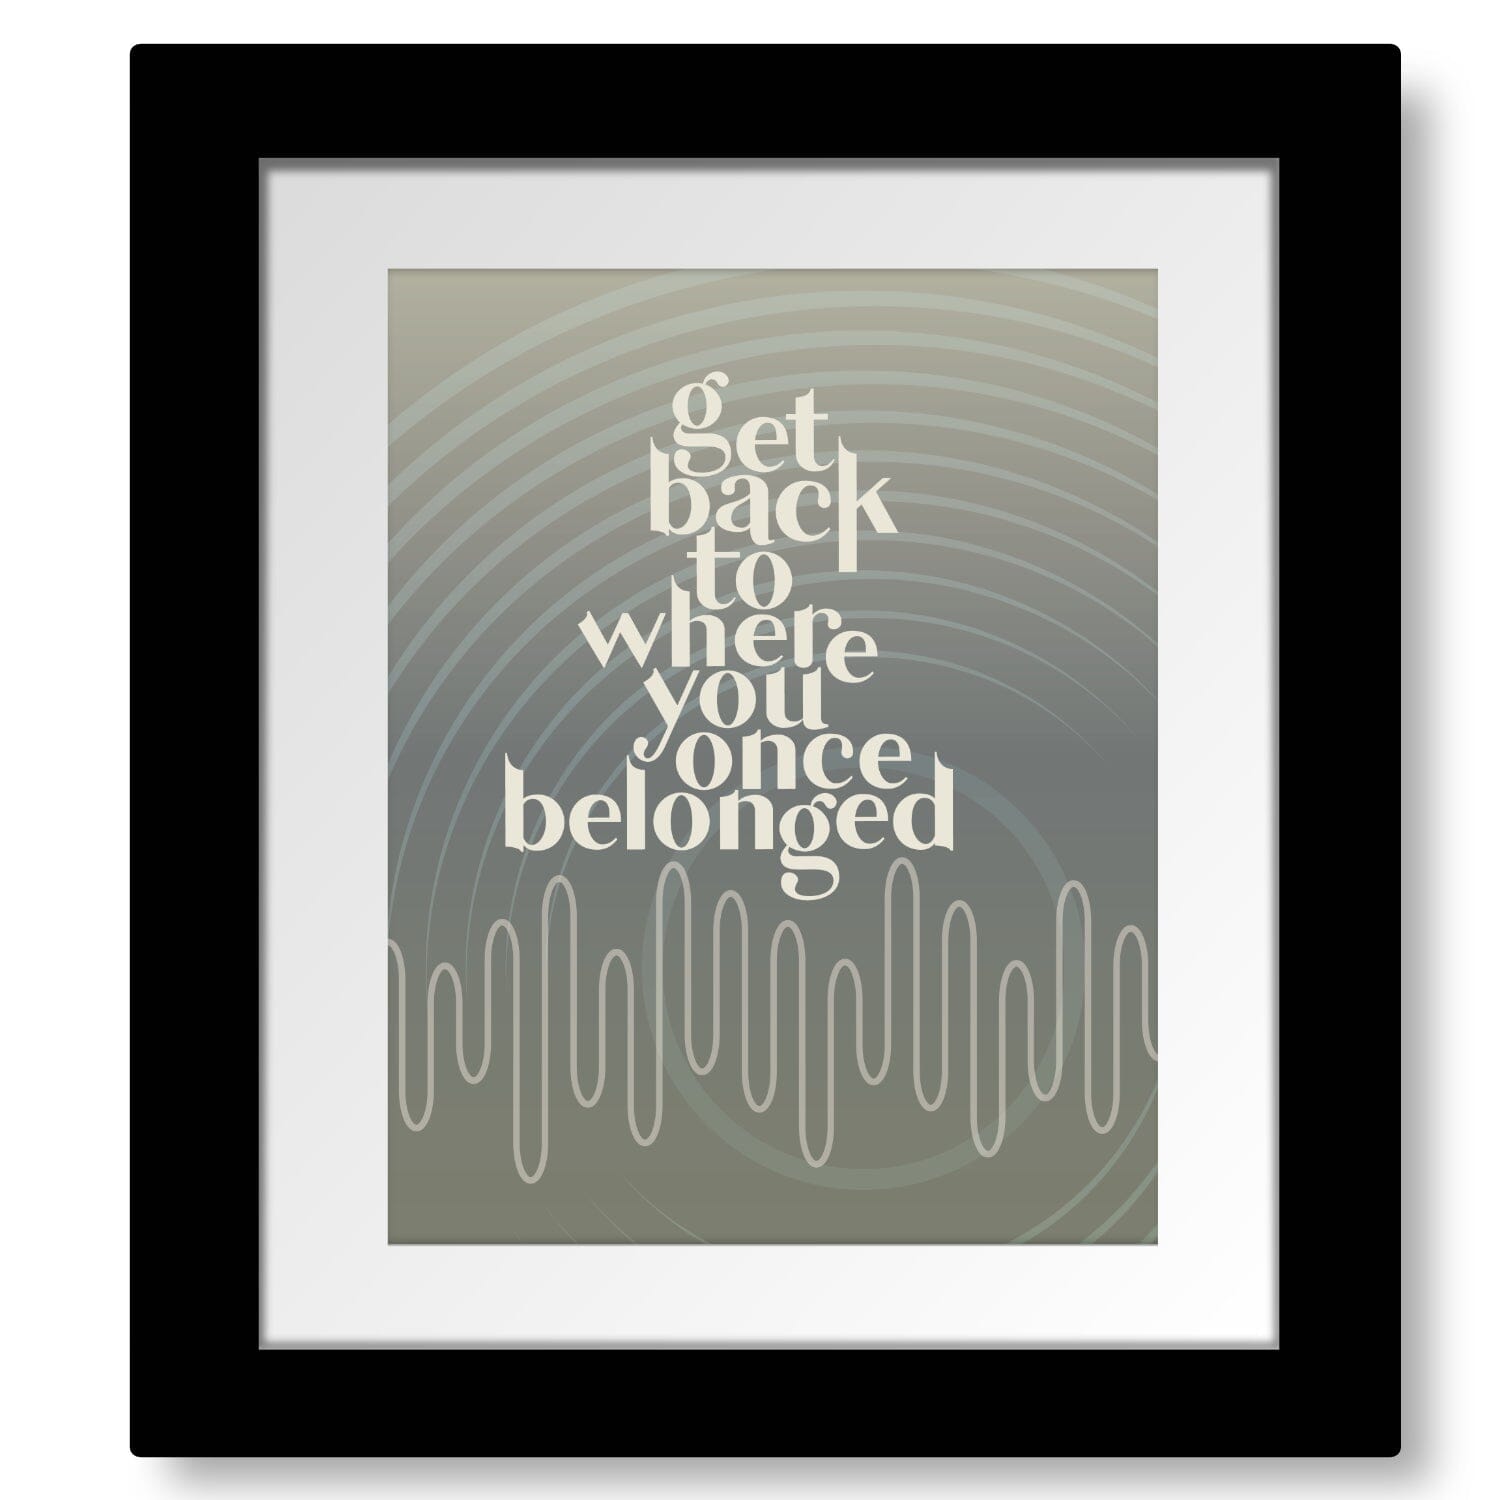 Get Back by the Beatles - Song Lyrics Music Art Print Poster Song Lyrics Art Song Lyrics Art 8x10 Matted and Framed Print 